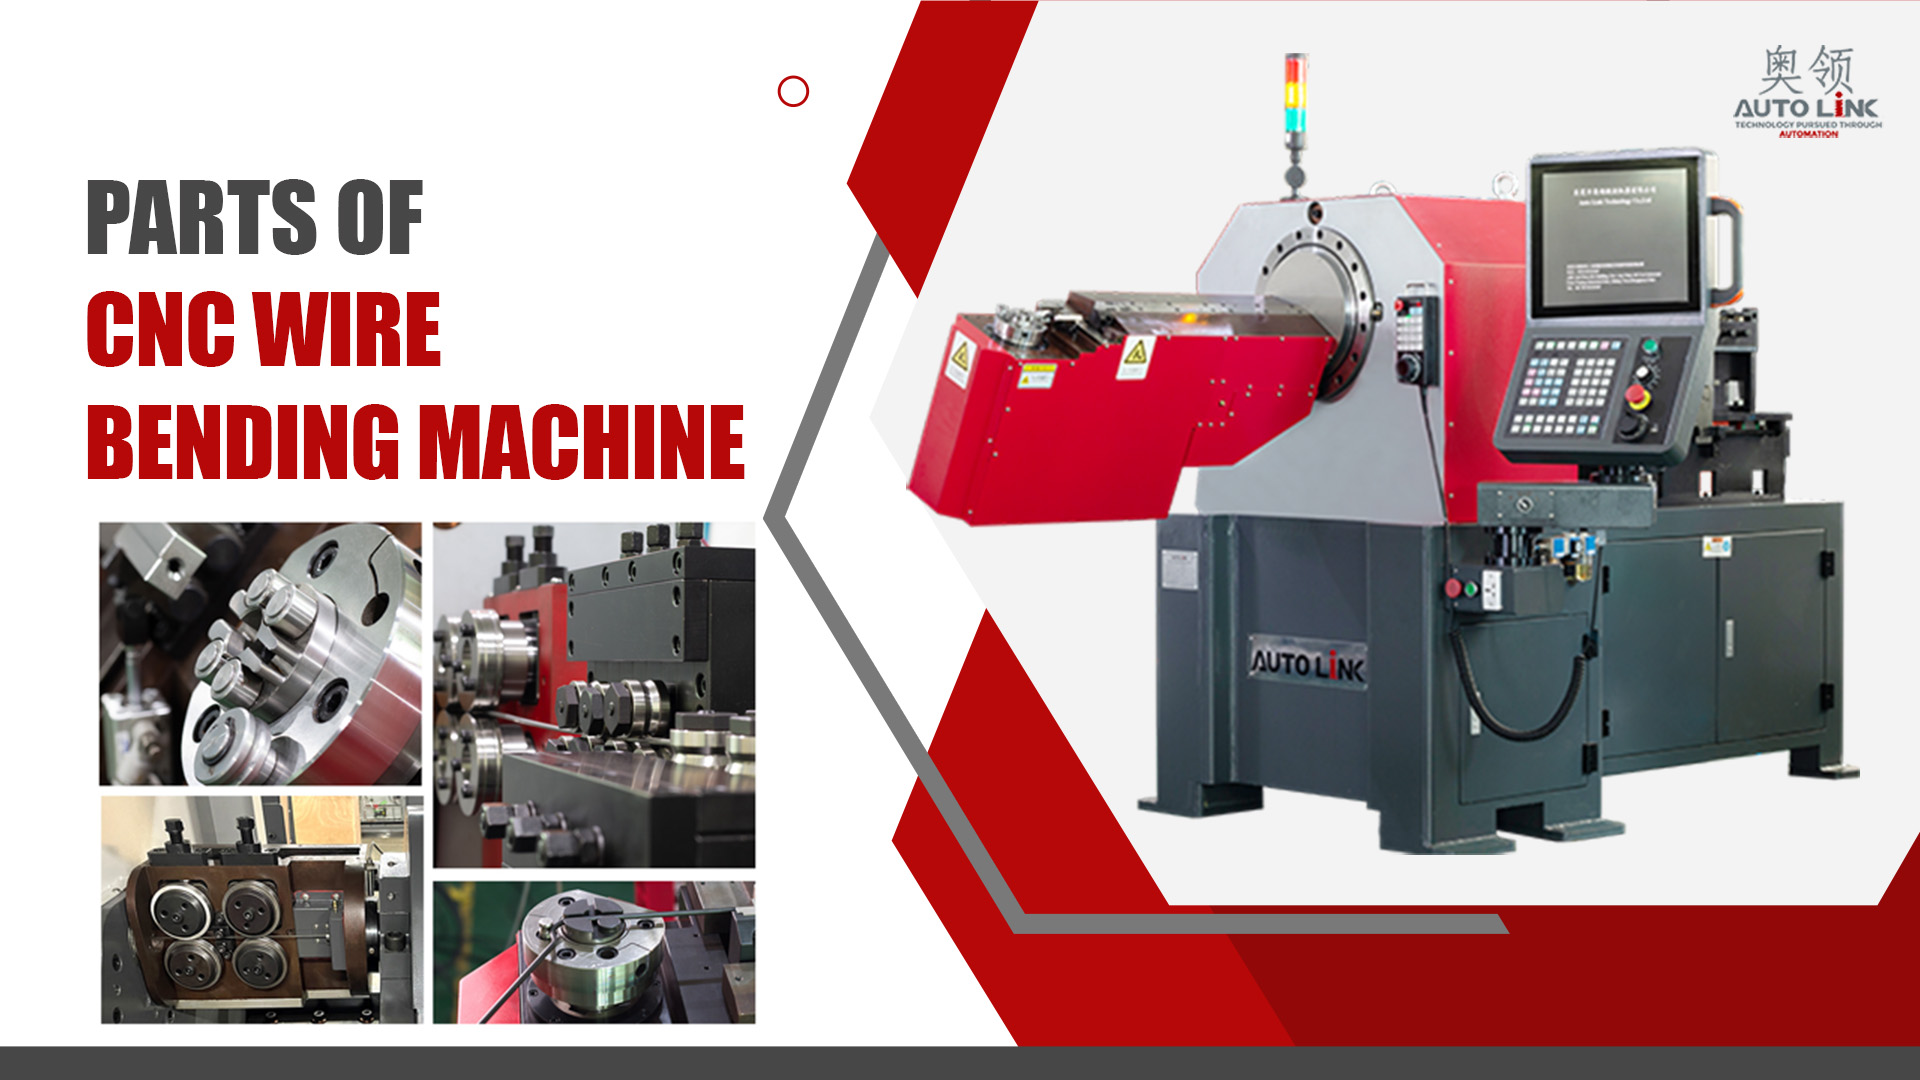 What are the parts of CNC Wire Bending Machine?